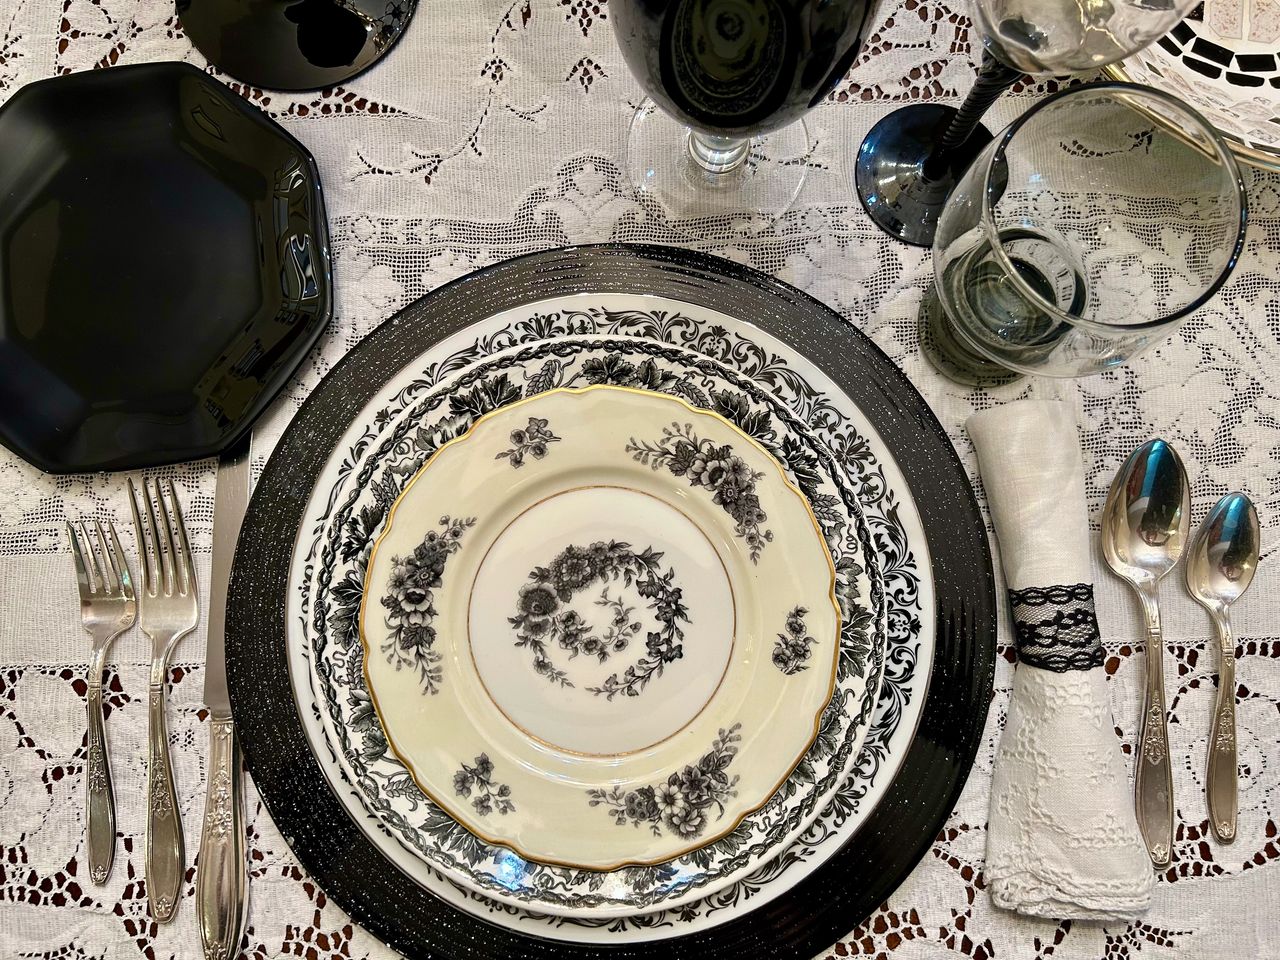 Layers of vintage dishes on a vintage lace tablecloth for an elegant Halloween tablescape.